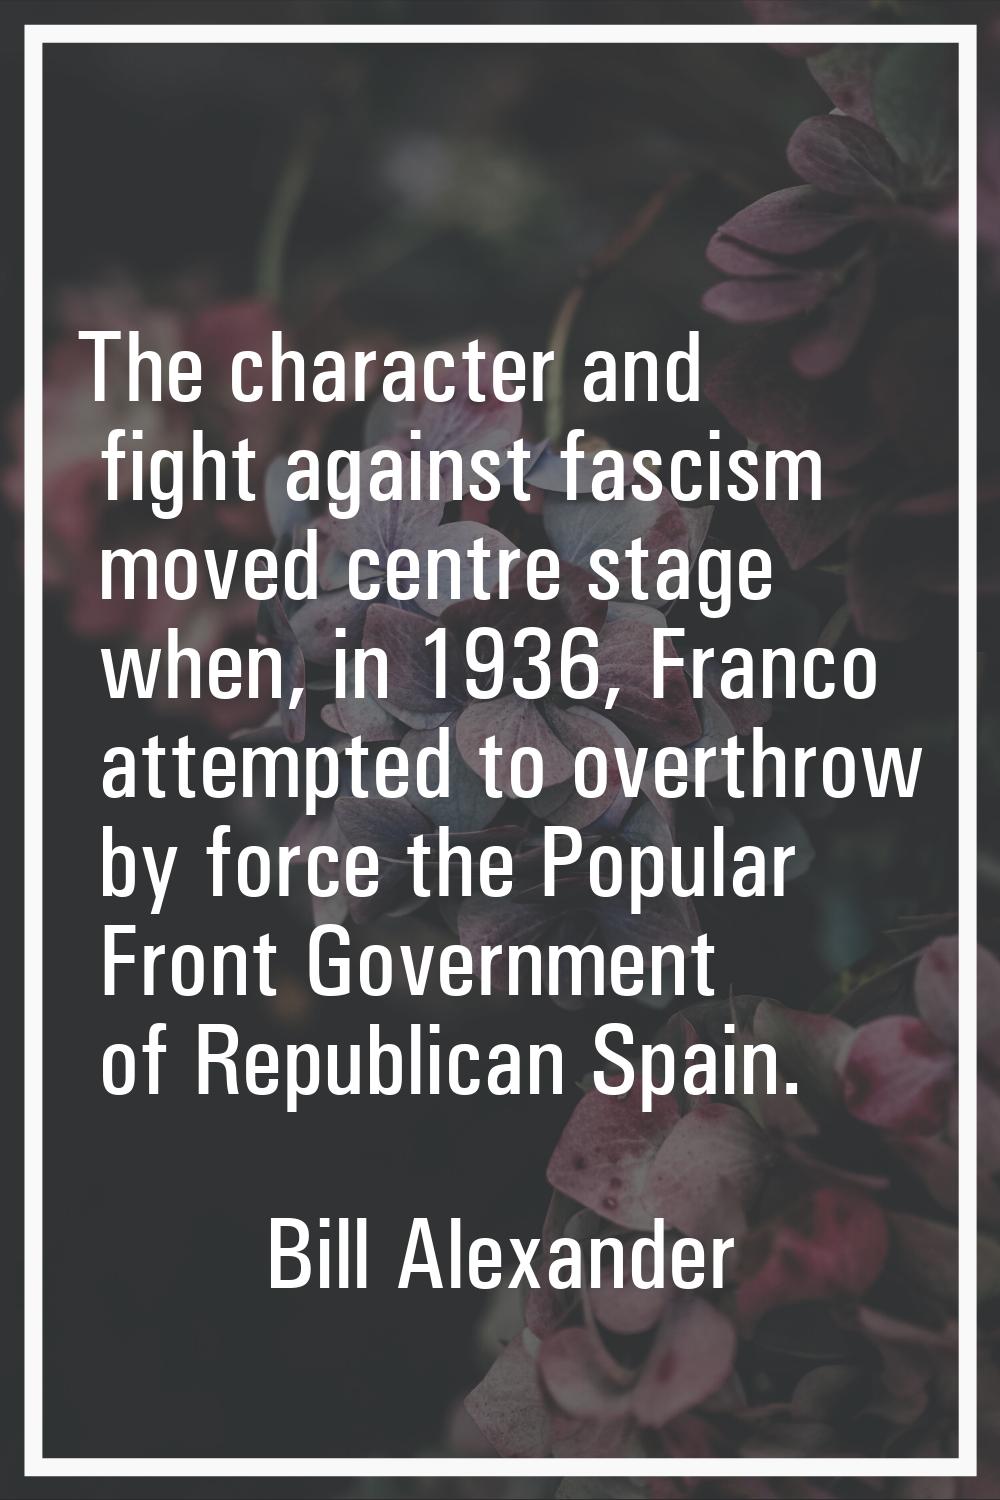 The character and fight against fascism moved centre stage when, in 1936, Franco attempted to overt